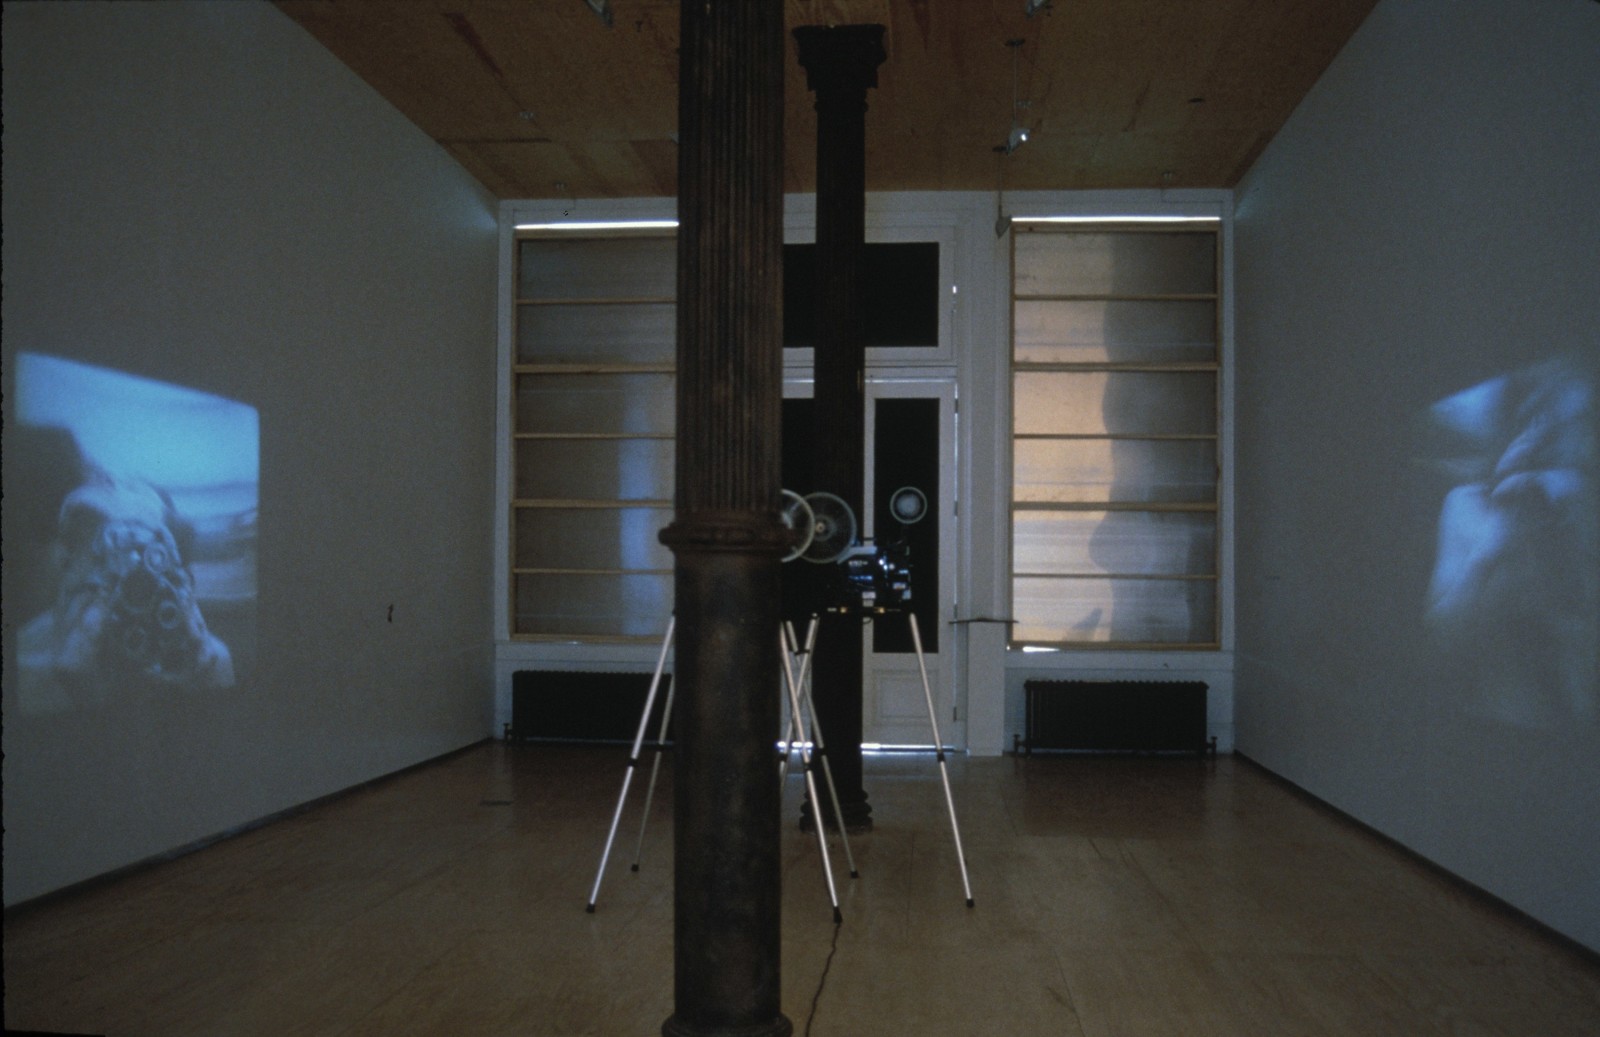 THE CRYSTAL STOPPER Curated by Carlos Basualdo installation view 4